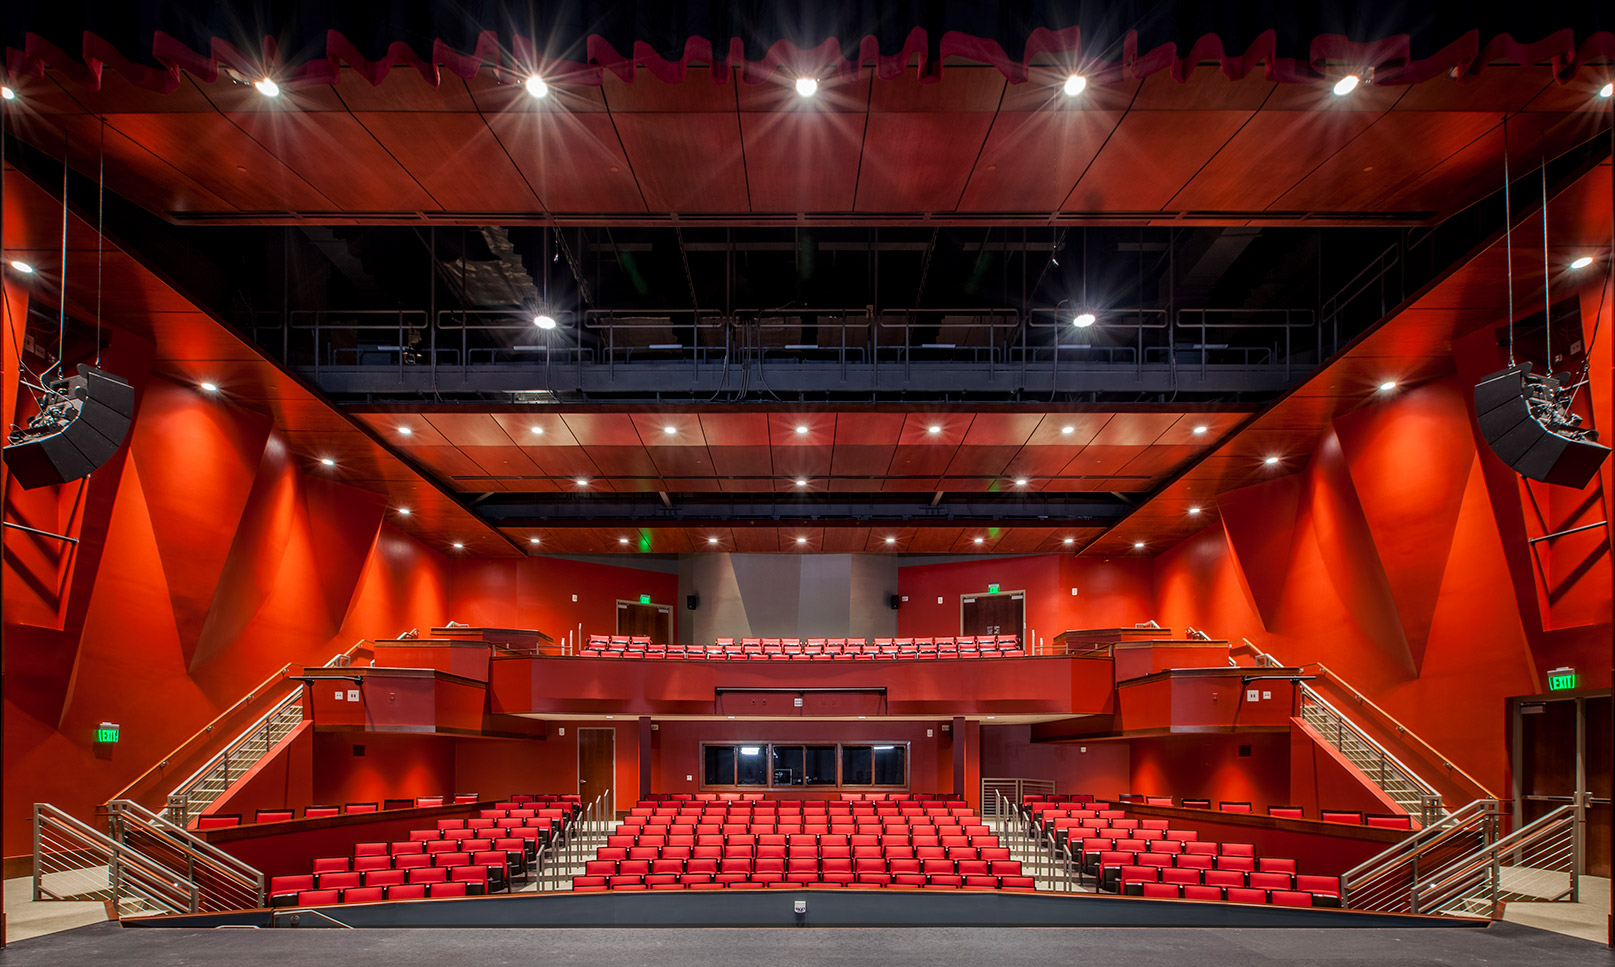 Theater in the Rosalind Sallenger Richardson Center for the Arts